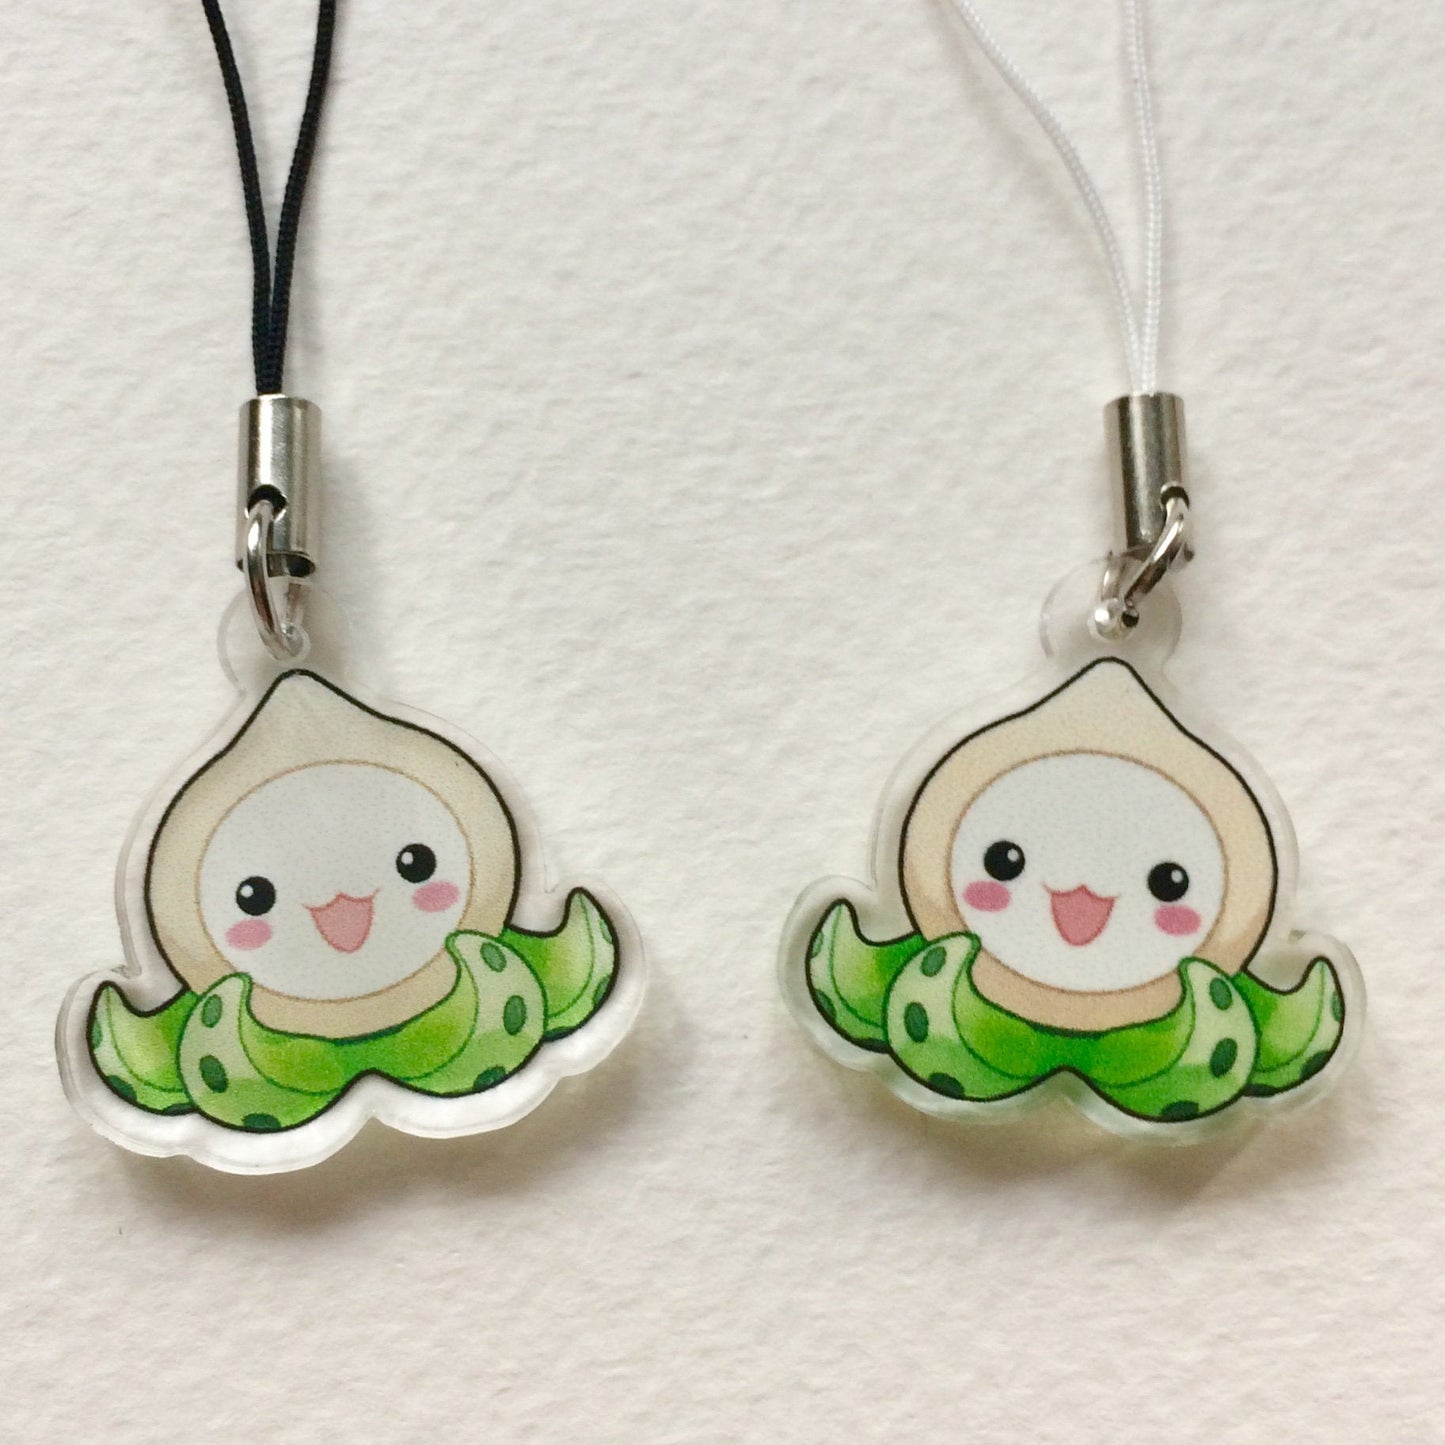 Pachimari OW Double-Sided Clear Acrylic or Epoxy Resin Charm